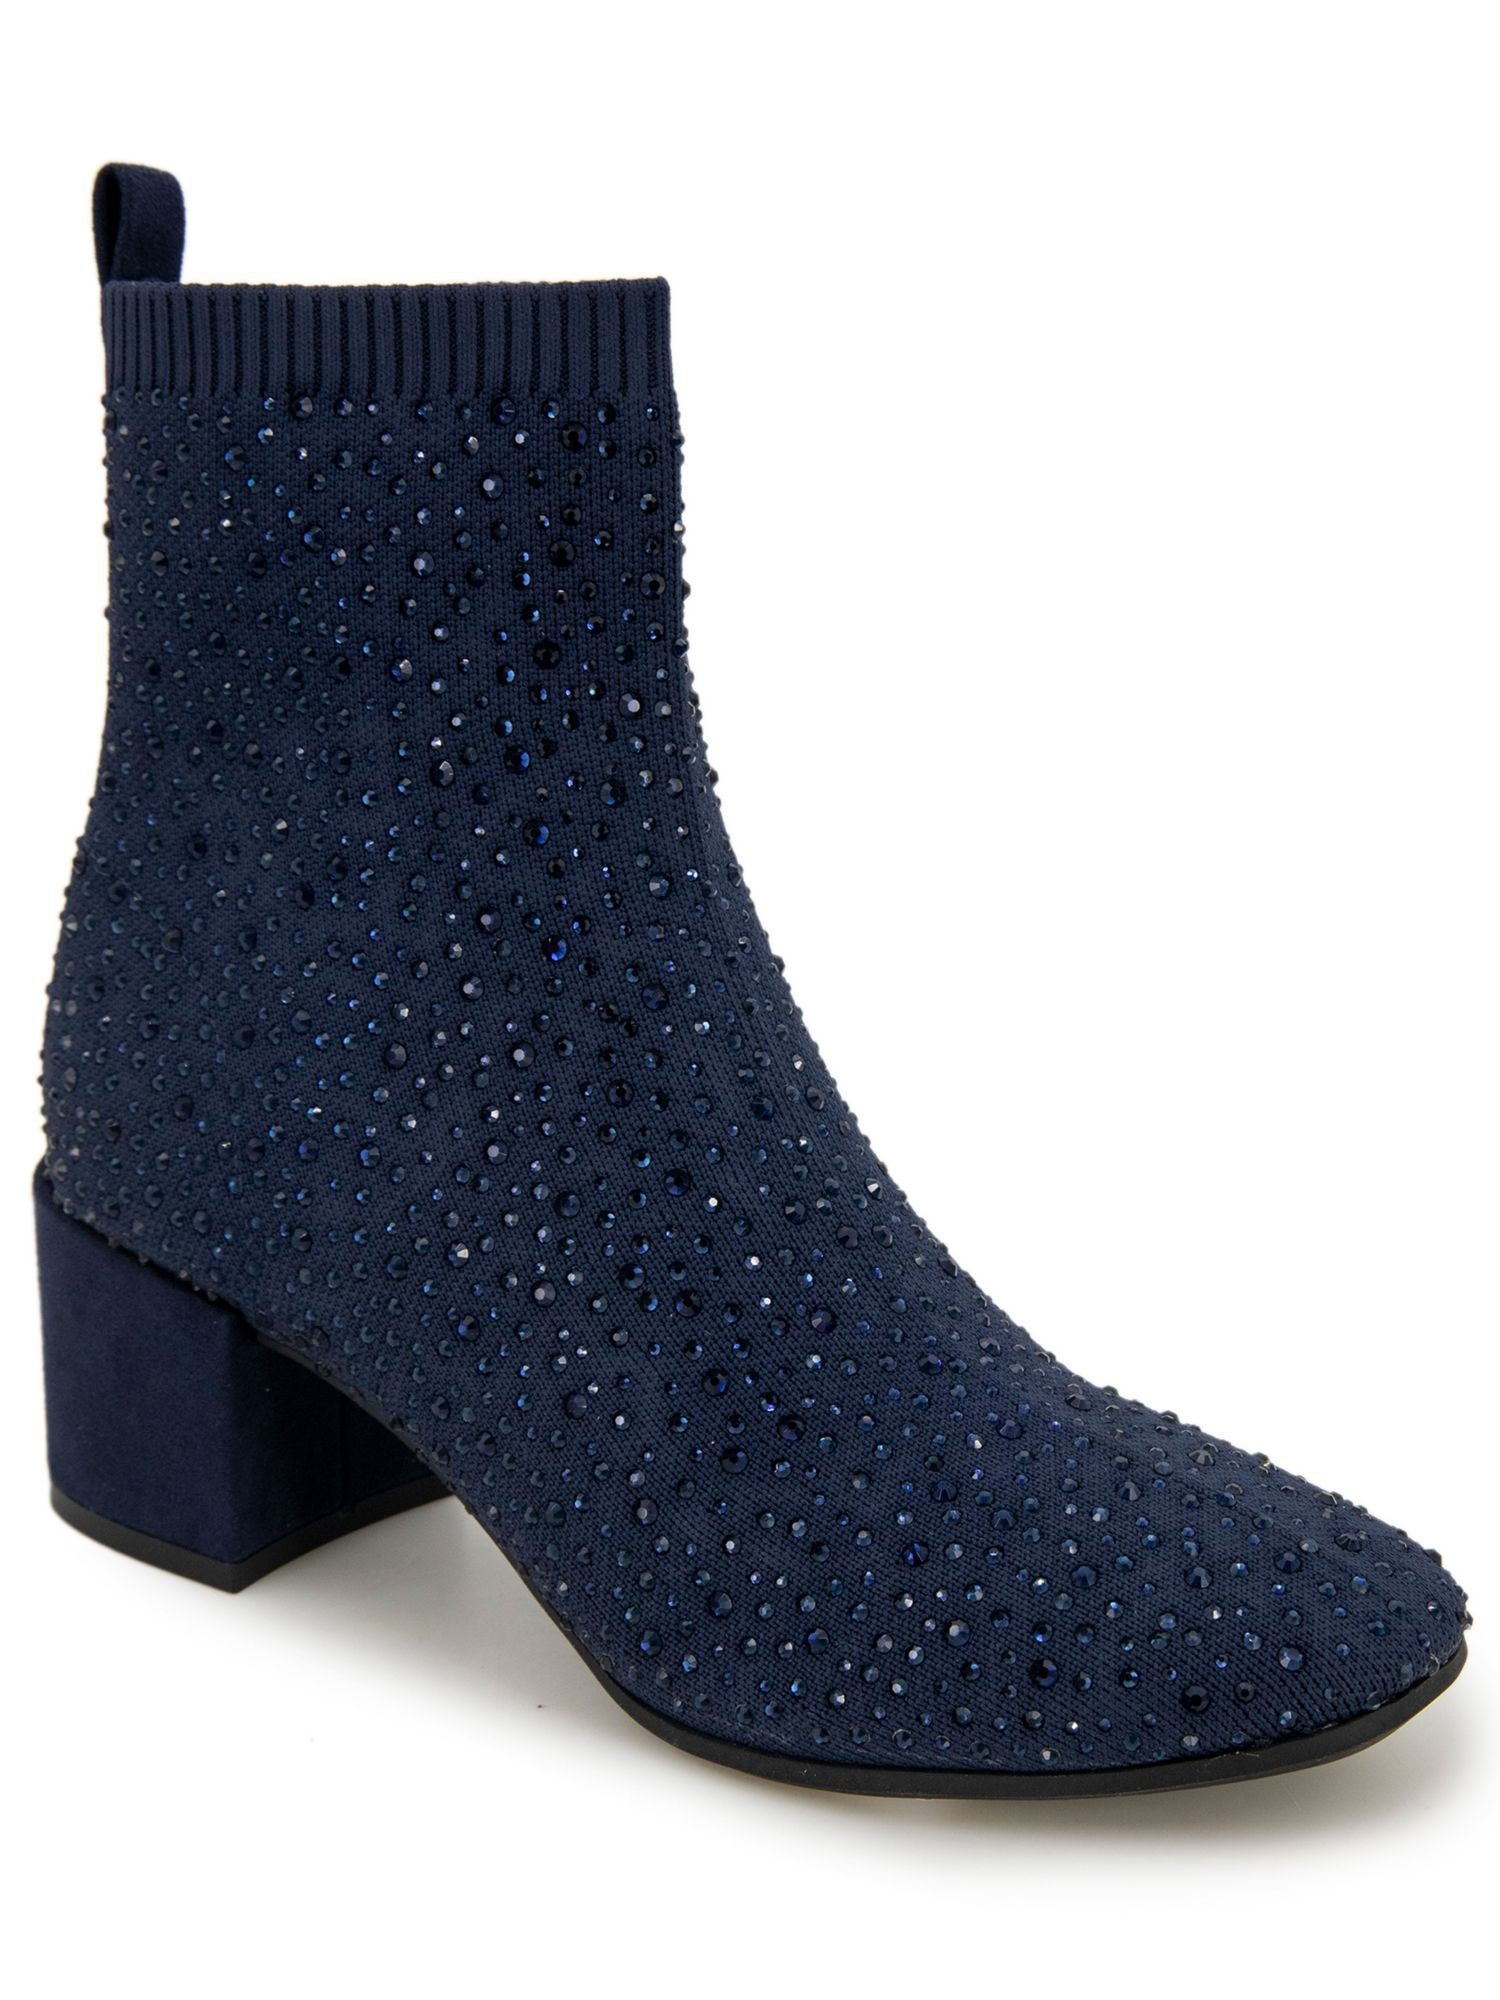 Kenneth Cole REACTION REACTION KENNETH COLE Womens Navy Embellished Stretch Rida Round Toe Block Heel Dress Booties 9